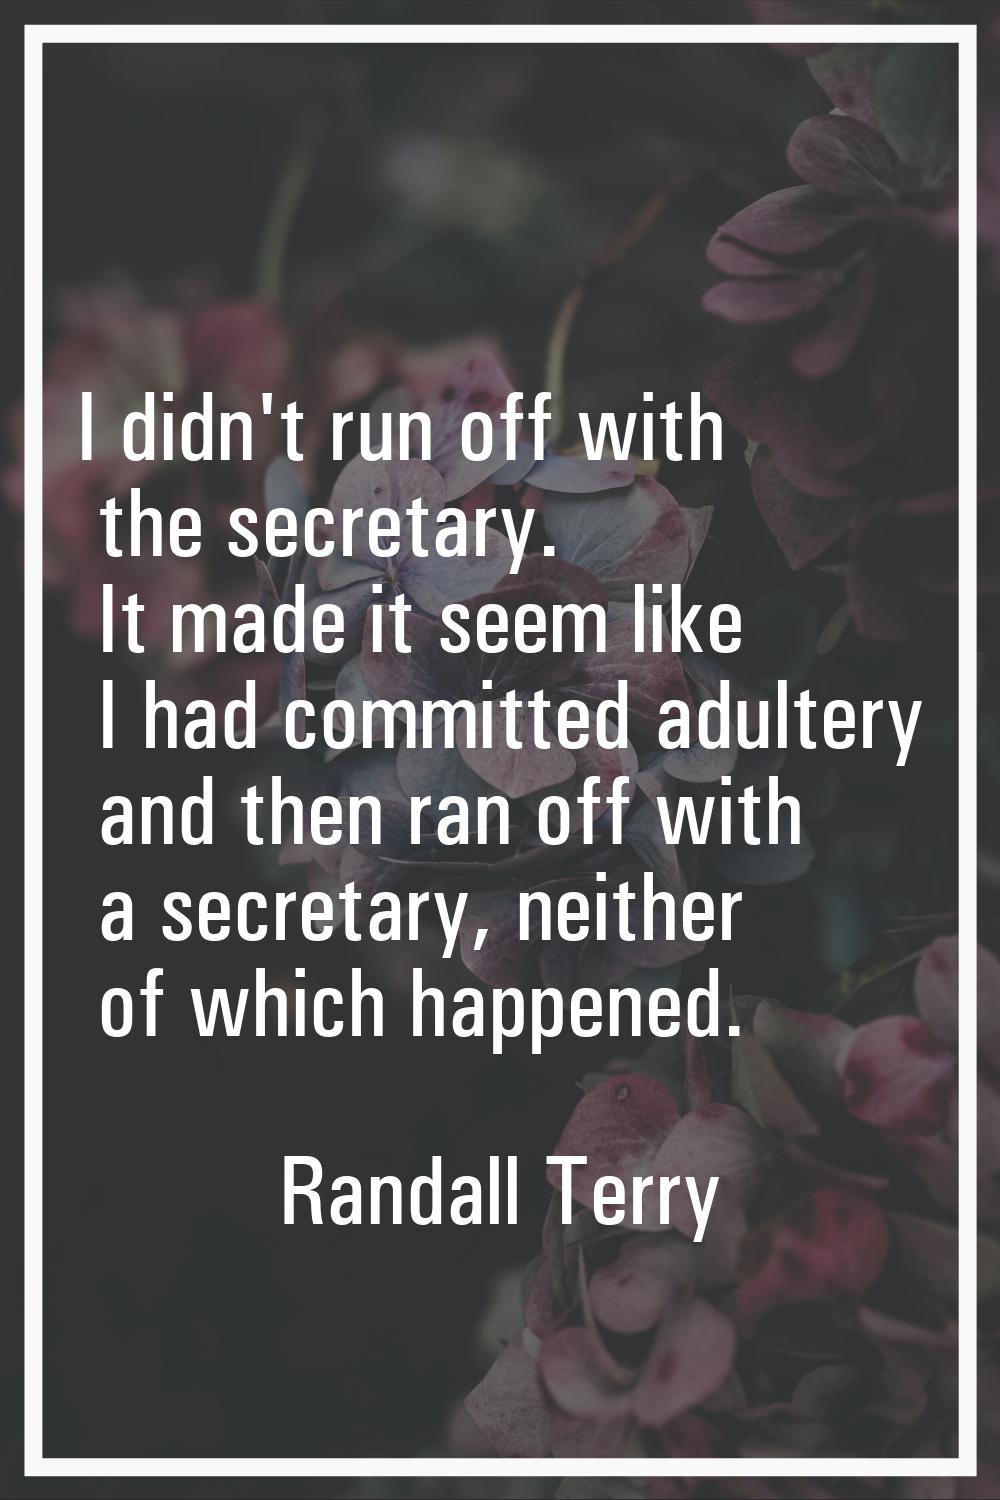 I didn't run off with the secretary. It made it seem like I had committed adultery and then ran off